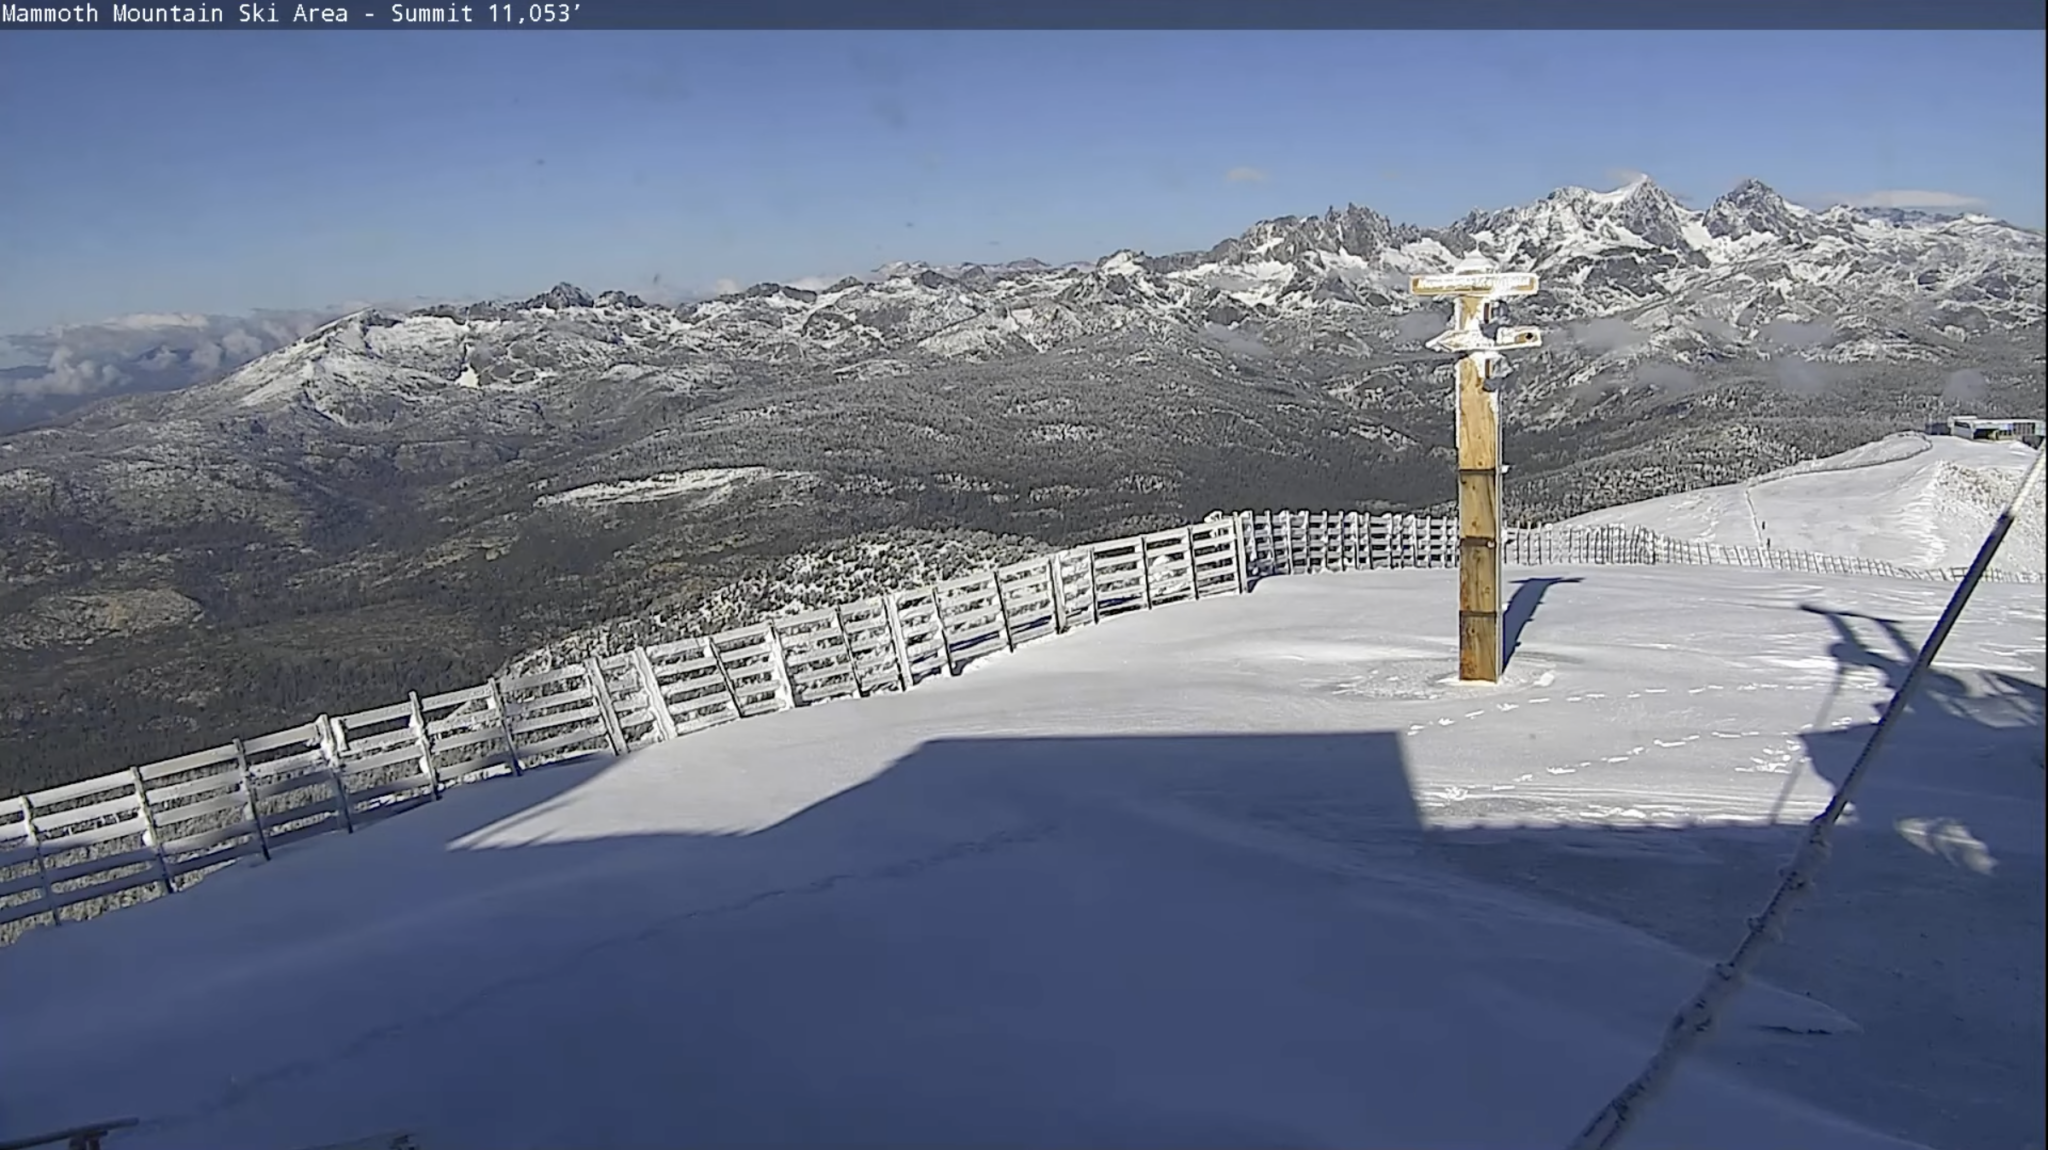 10-2-2023 - Mammoth Mountain picked up 2-3 inches of snow over the last 24 hours.